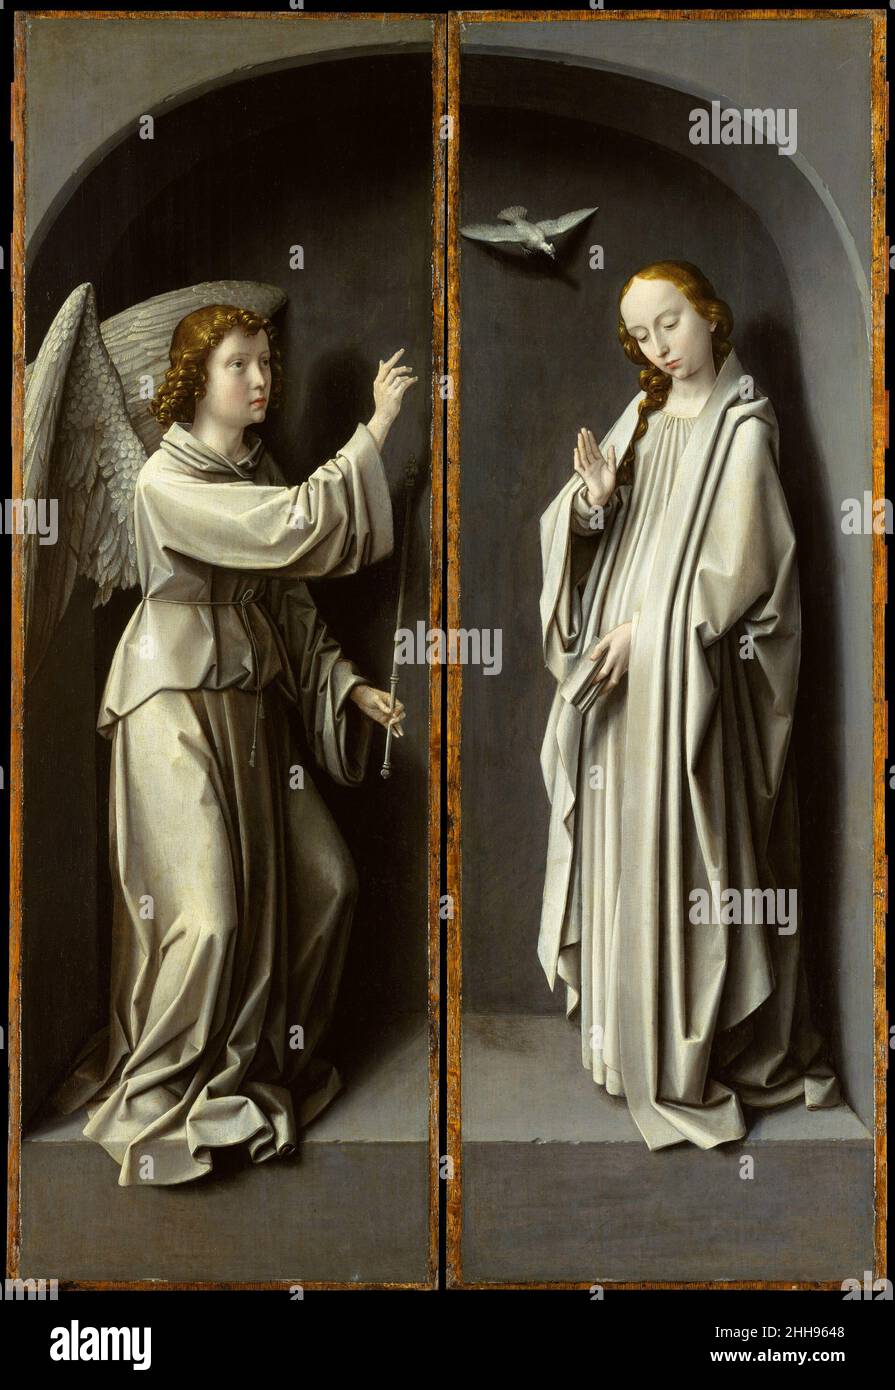 Archangel Gabriel; The Virgin Annunciate ca. 1510 Gerard David Netherlandish Gerard David painted in Bruges all his life. Where he trained is unknown, though his early works show the influence of his northern Netherlandish roots, and of the art of Hugo van der Goes and Dieric Bouts. These two Annunciation panels, along with the depictions of the Passion that decorated their reverses (1975.1.119), originally formed the movable wings of an altarpiece. When the wings were closed, the Archangel Gabriel and the Virgin Annunciate were shown. When opened, on certain feast days, the Christ Carrying th Stock Photo